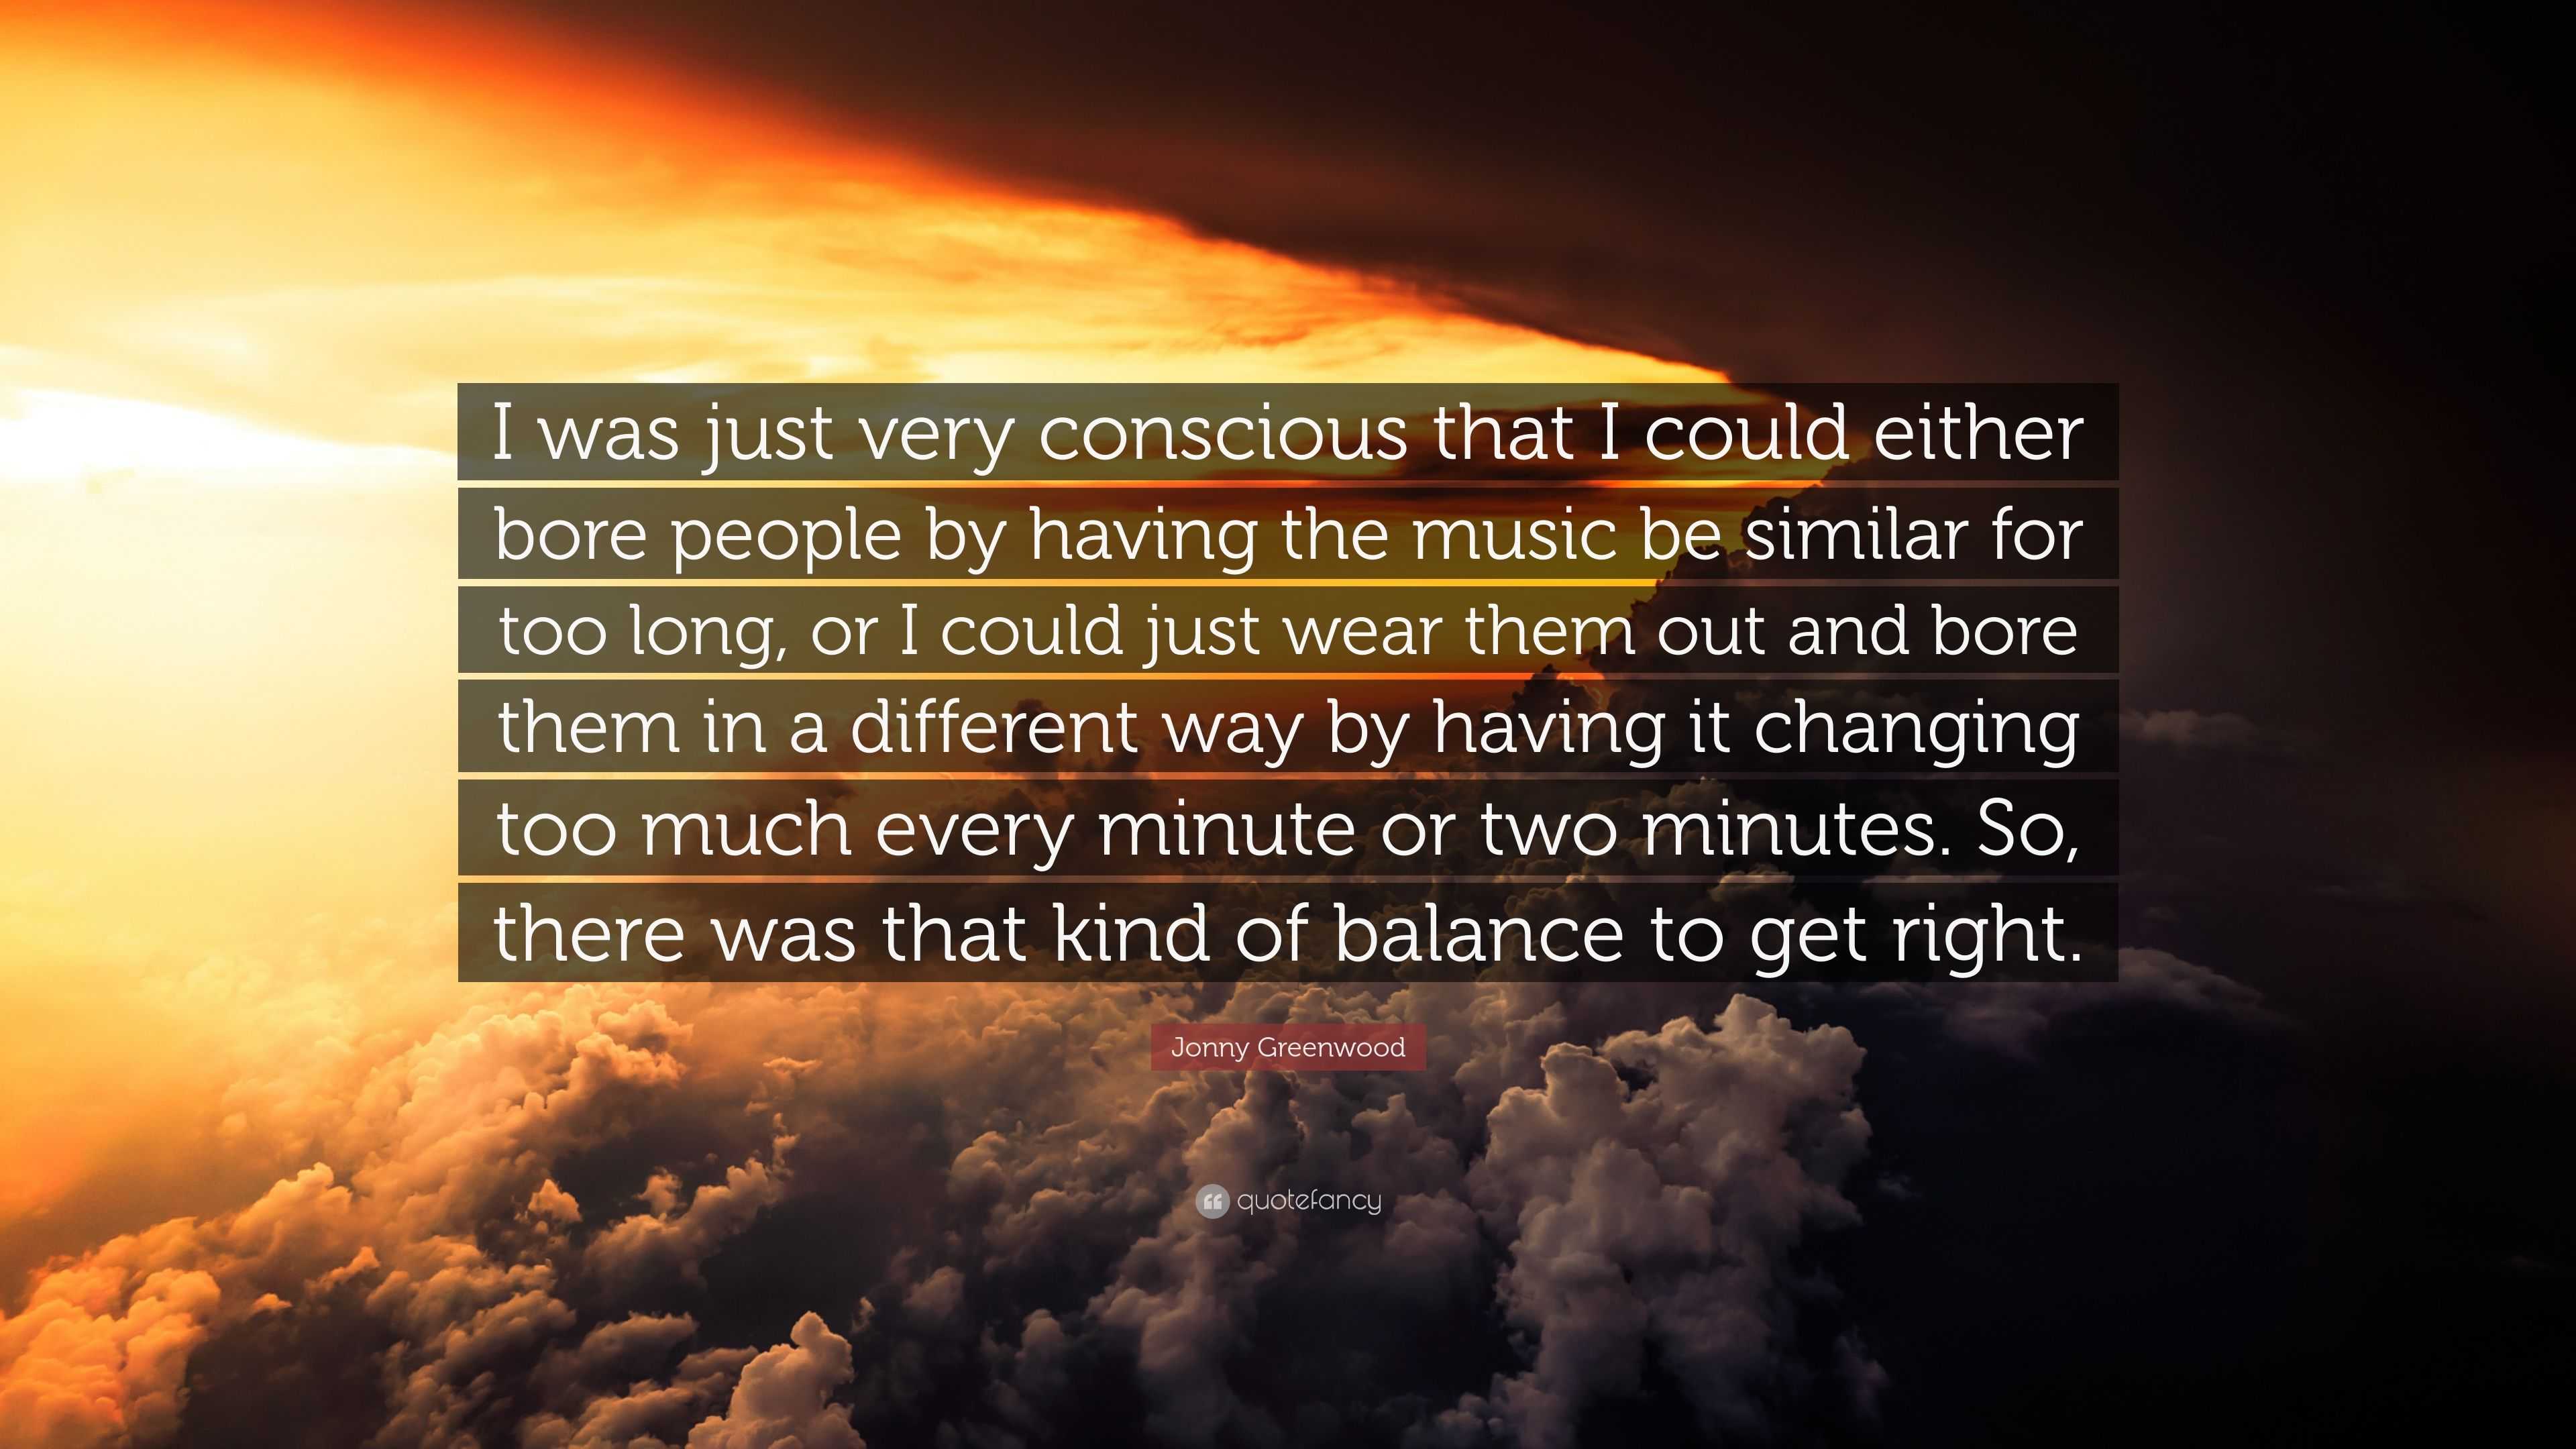 Jonny Greenwood Quote I Was Just Very Conscious That I Could Either Bore People By Having The Music Be Similar For Too Long Or I Could Just W 7 Wallpapers Quotefancy